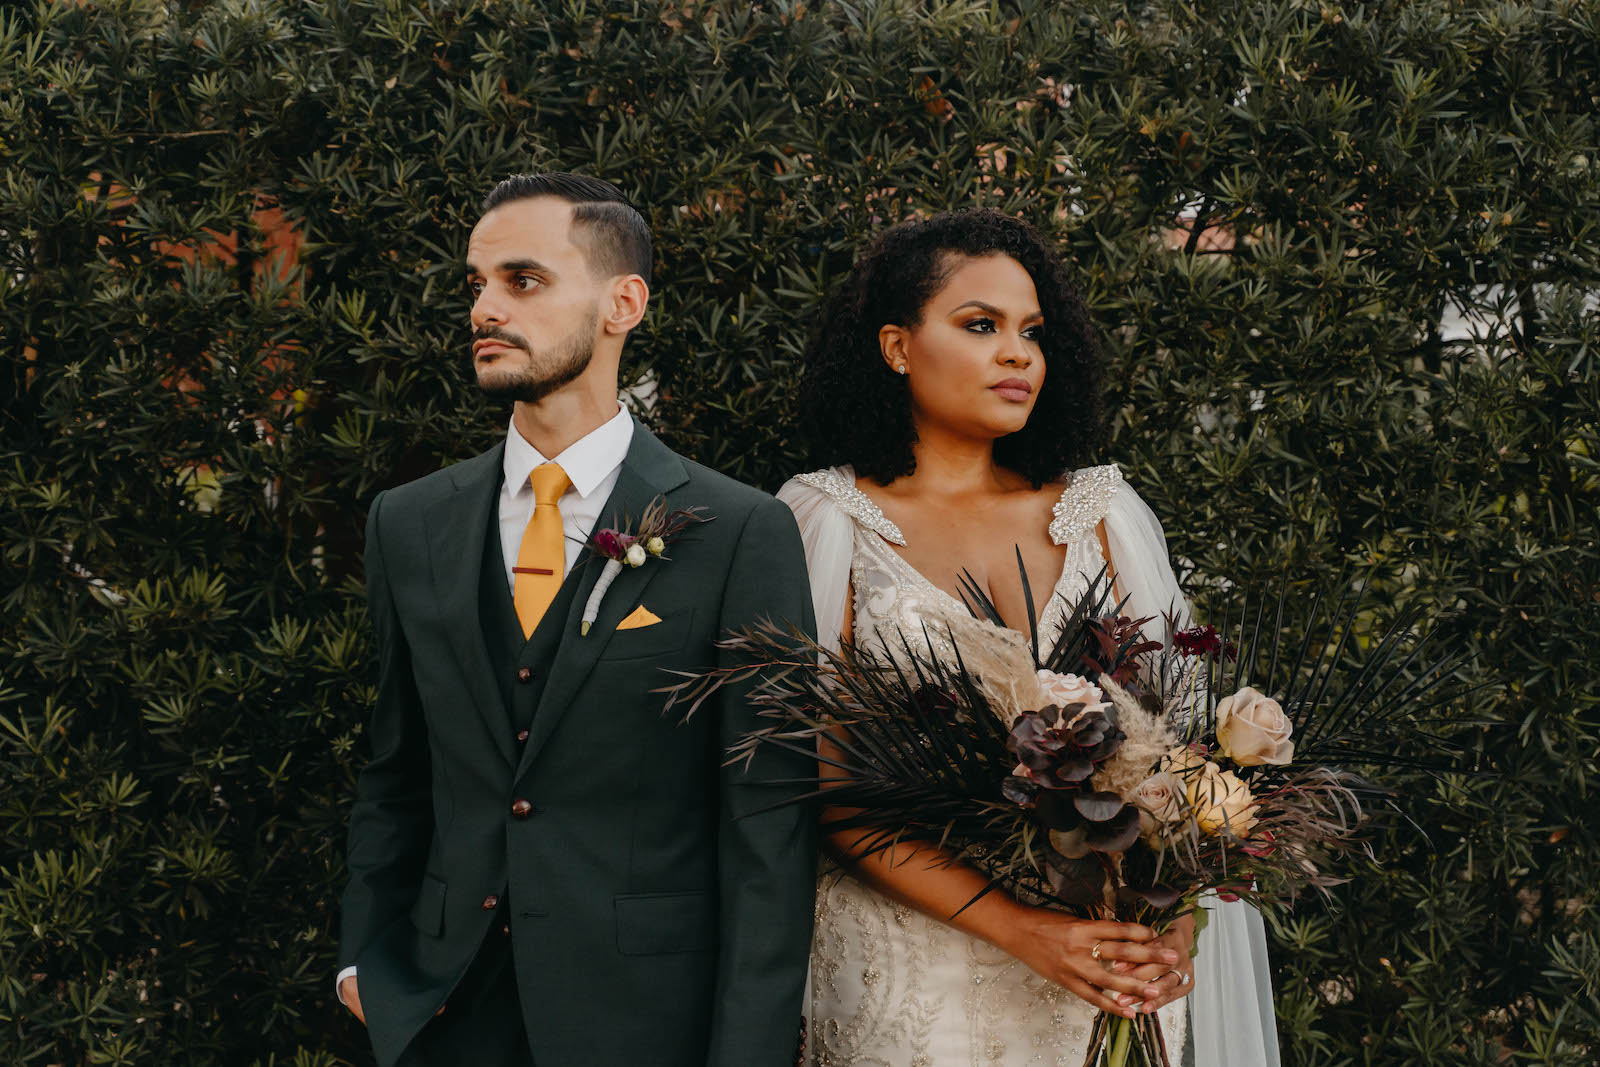 Outdoor Bride and Groom Portrait in Tampa Wedding Venue Hyde House | Illusion Lace Embroidered Beaded V Neck Wedding Dress Bridal Gown with Sheer Tulle Cape Sleeves by Designer Amalia Carrara Bridal | Groom in Classic Black Tux Suit with Gold Tie | Loose Wild Boho Bridal Bouquet with Deep Red Burgundy and Blush Roses